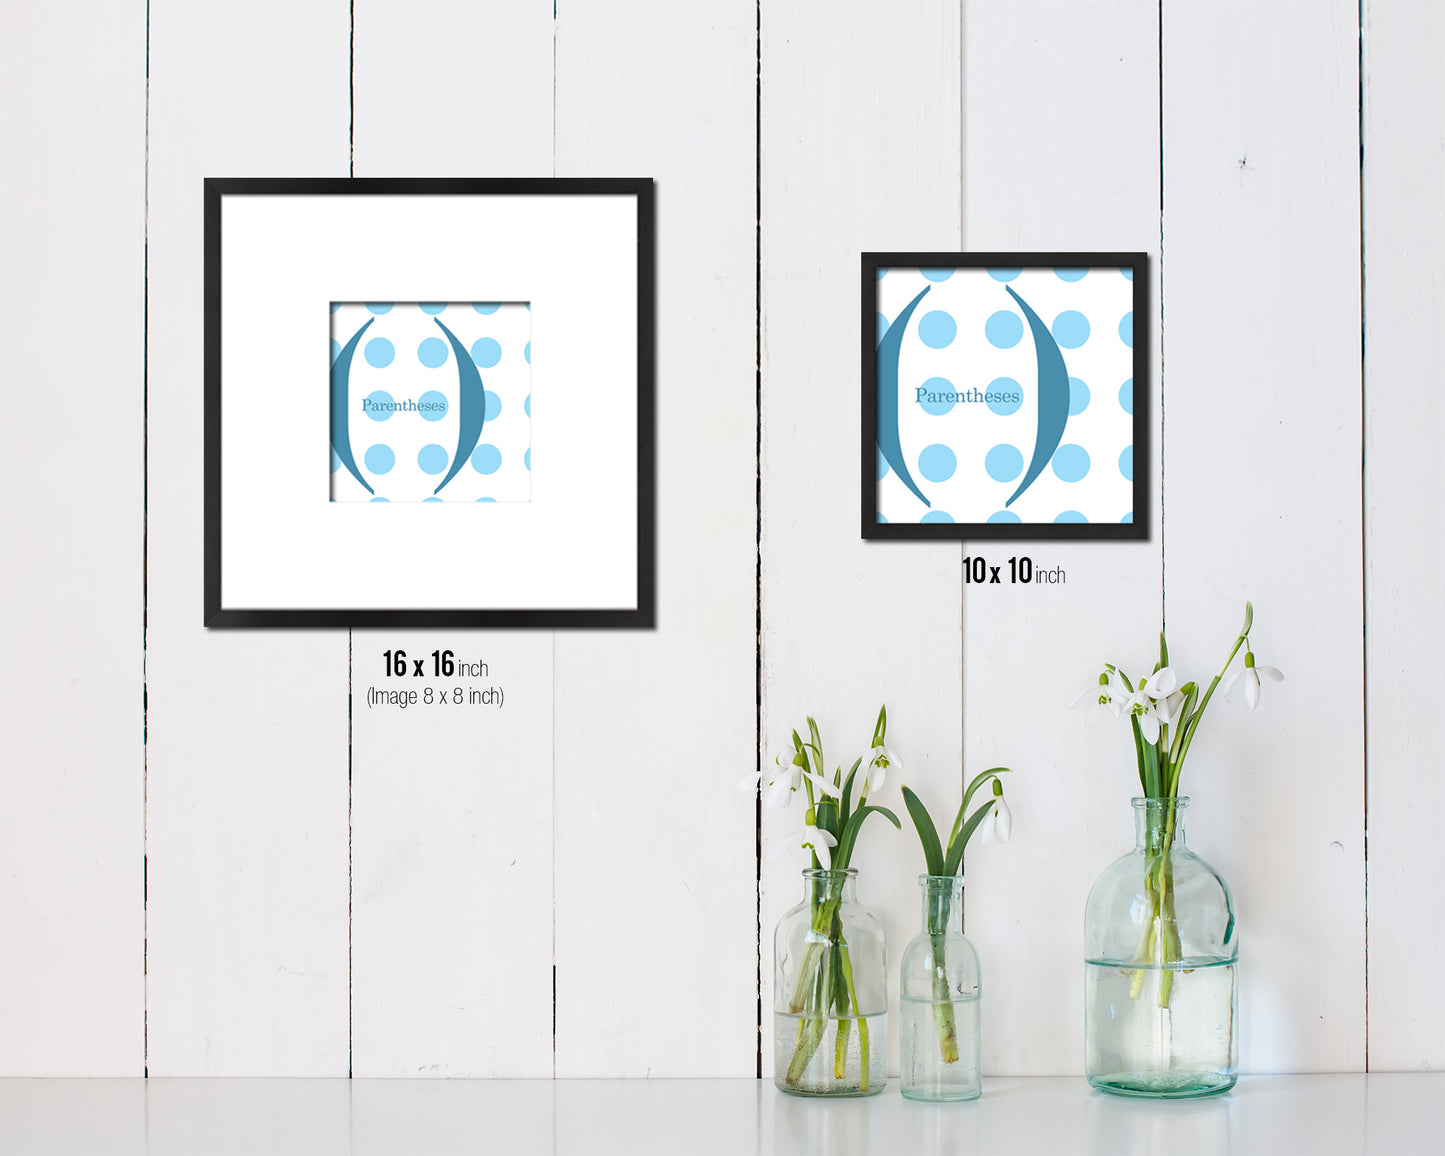 Parentheses Punctuation Symbol Framed Print Home Decor Wall Art English Teacher Gifts